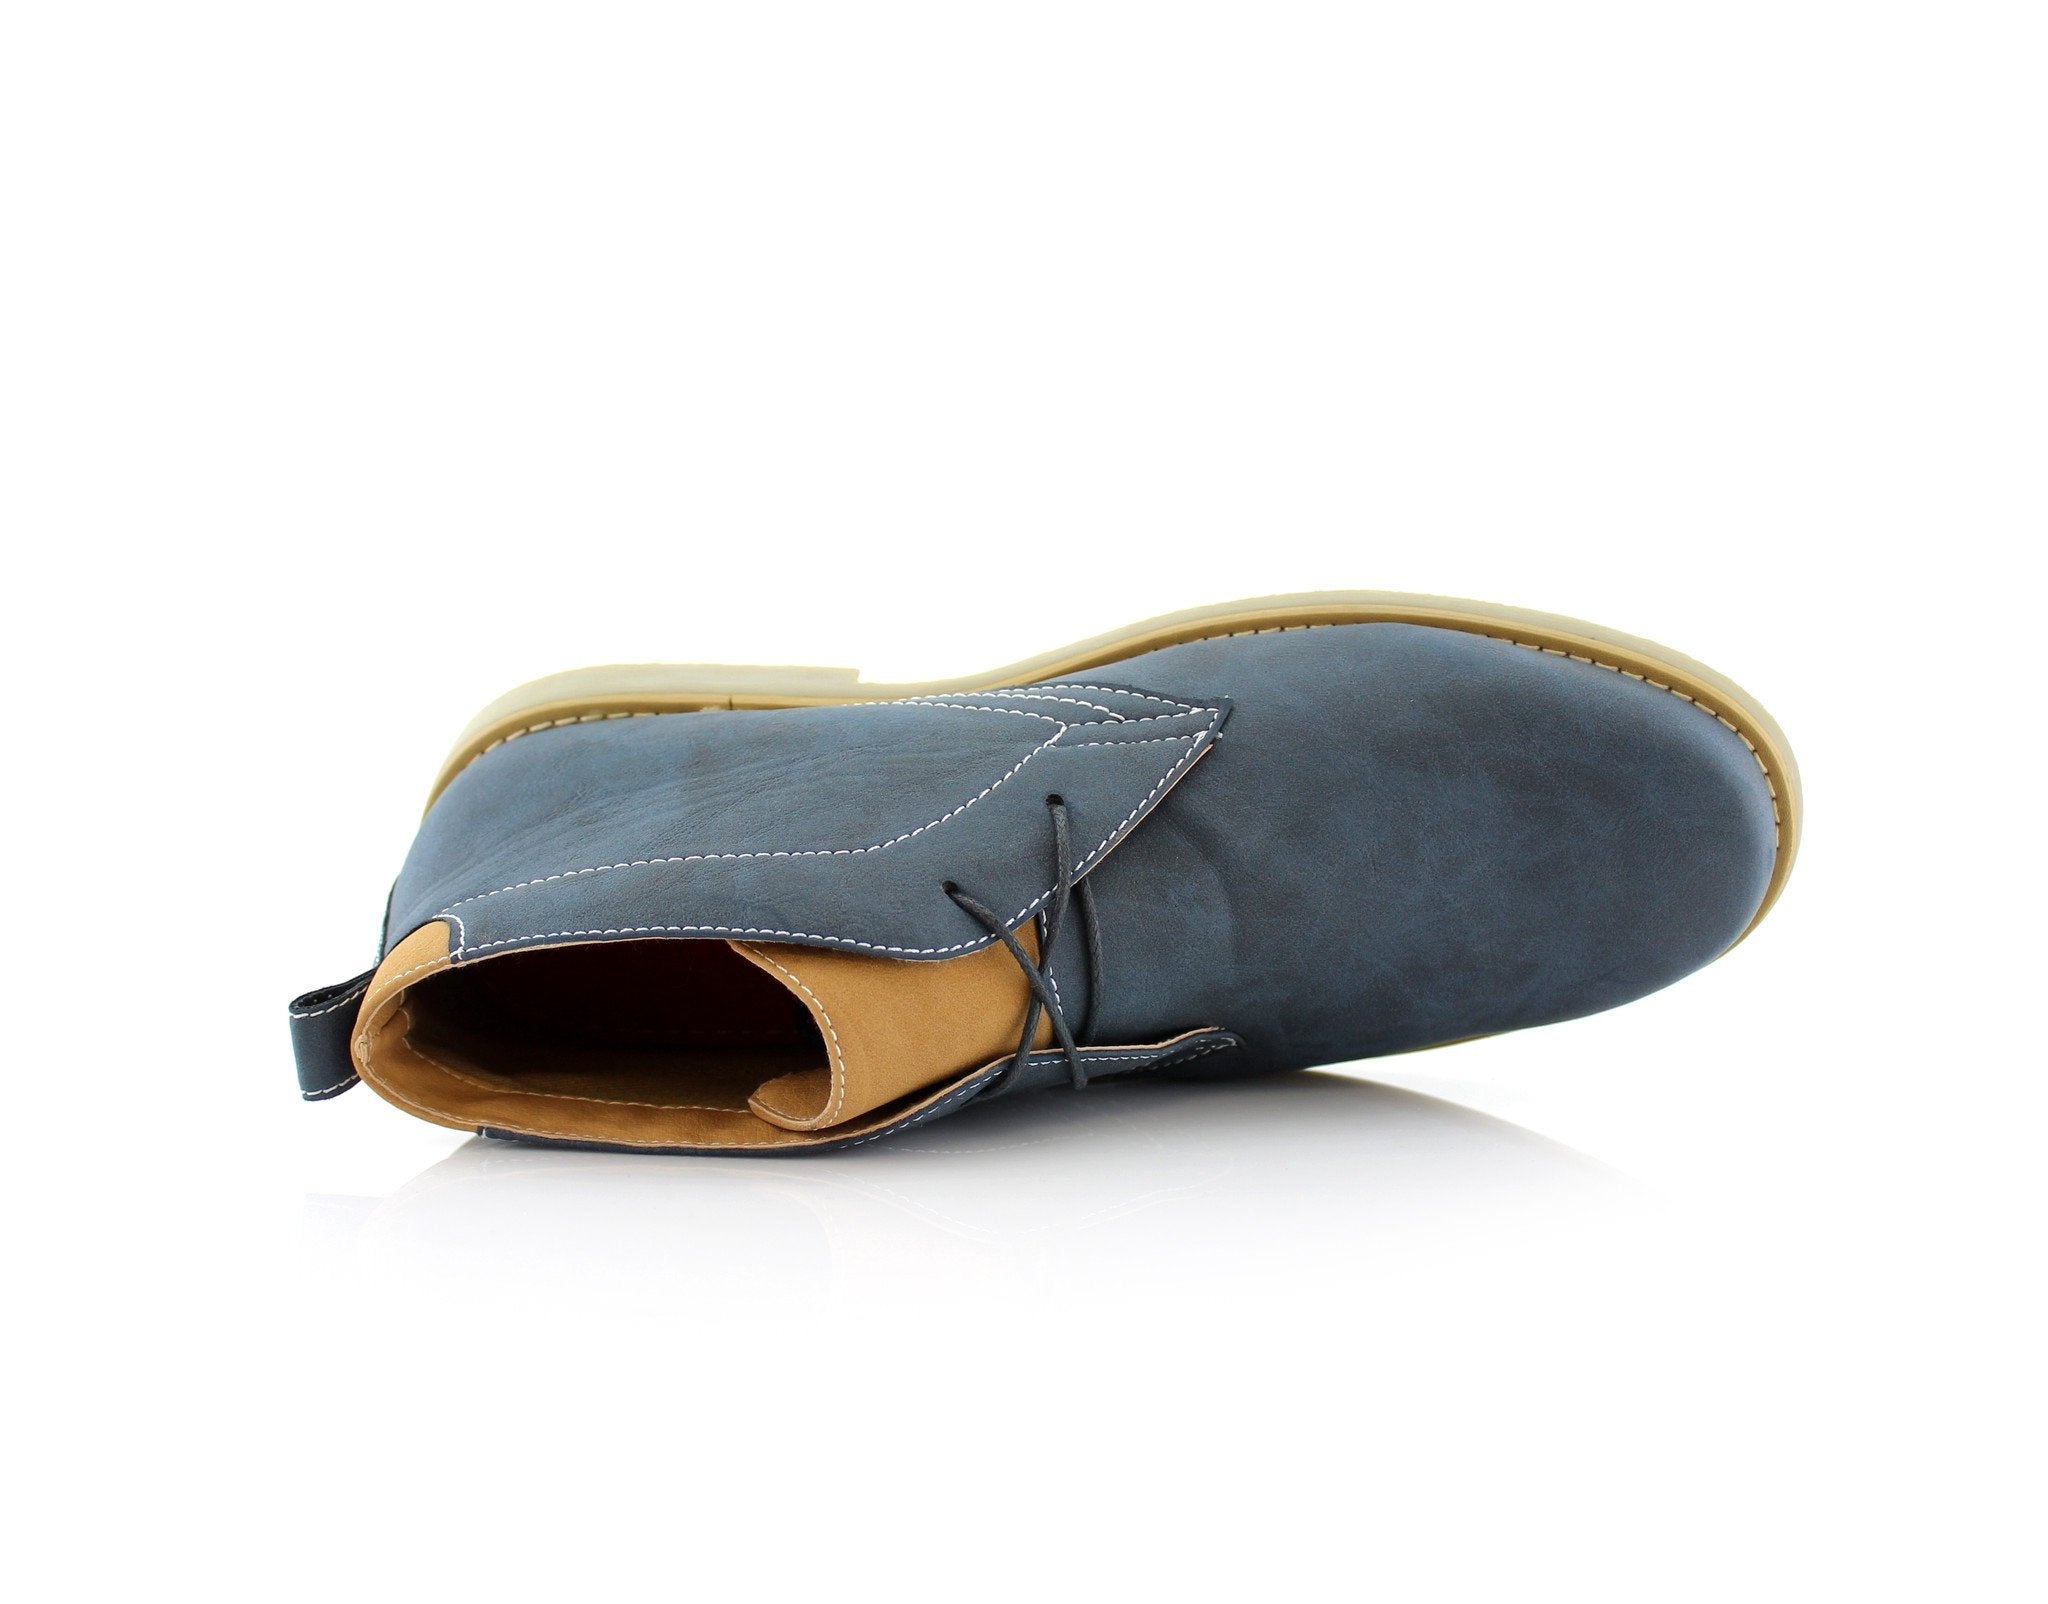 Classic Chukka Boots | Elliot by Polar Fox | Conal Footwear | Top-Down Angle View